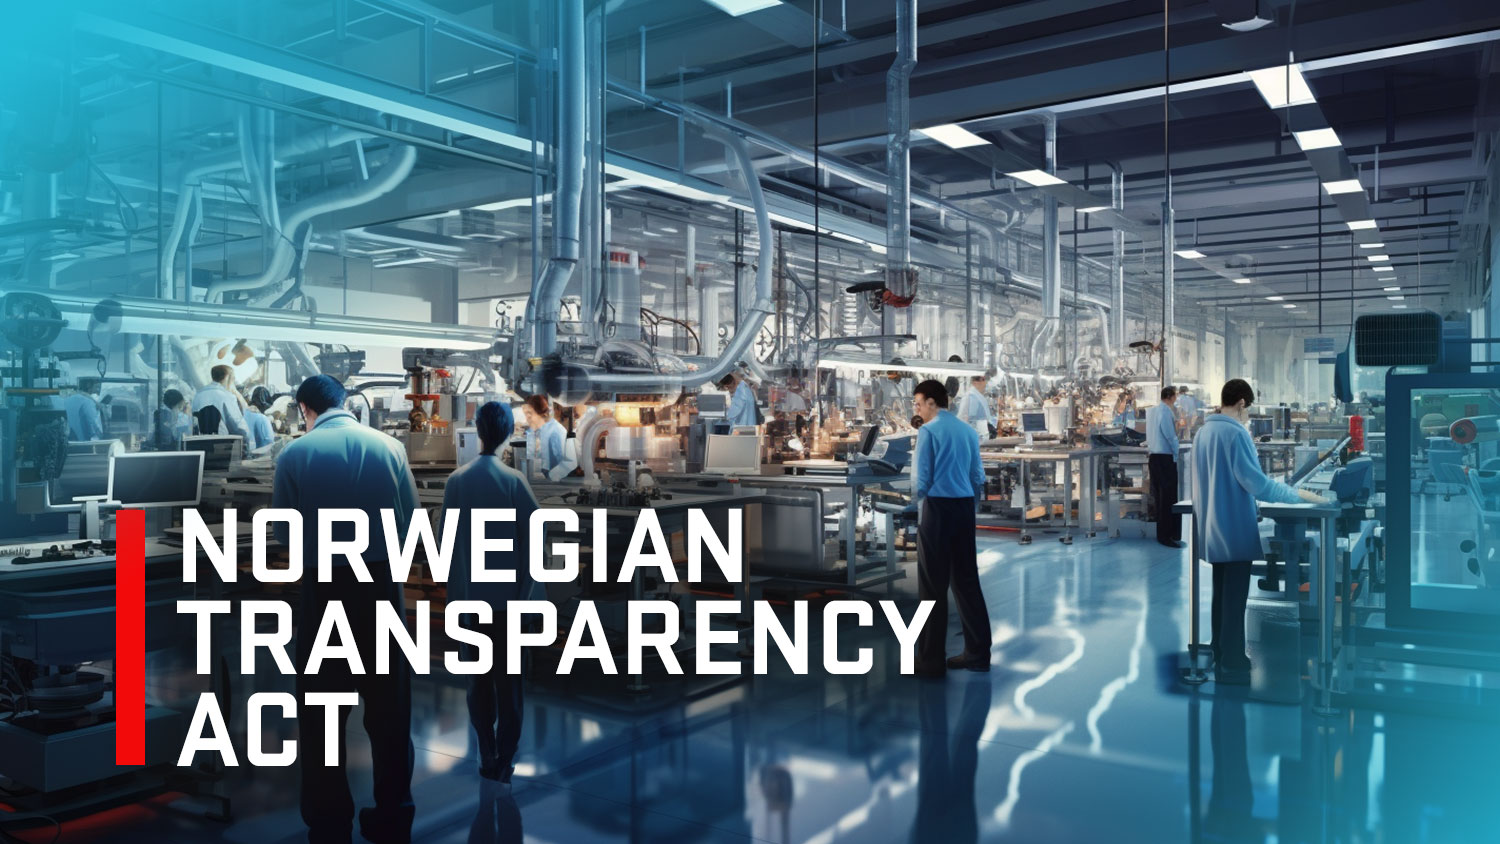 The Norwegian Transparency Act